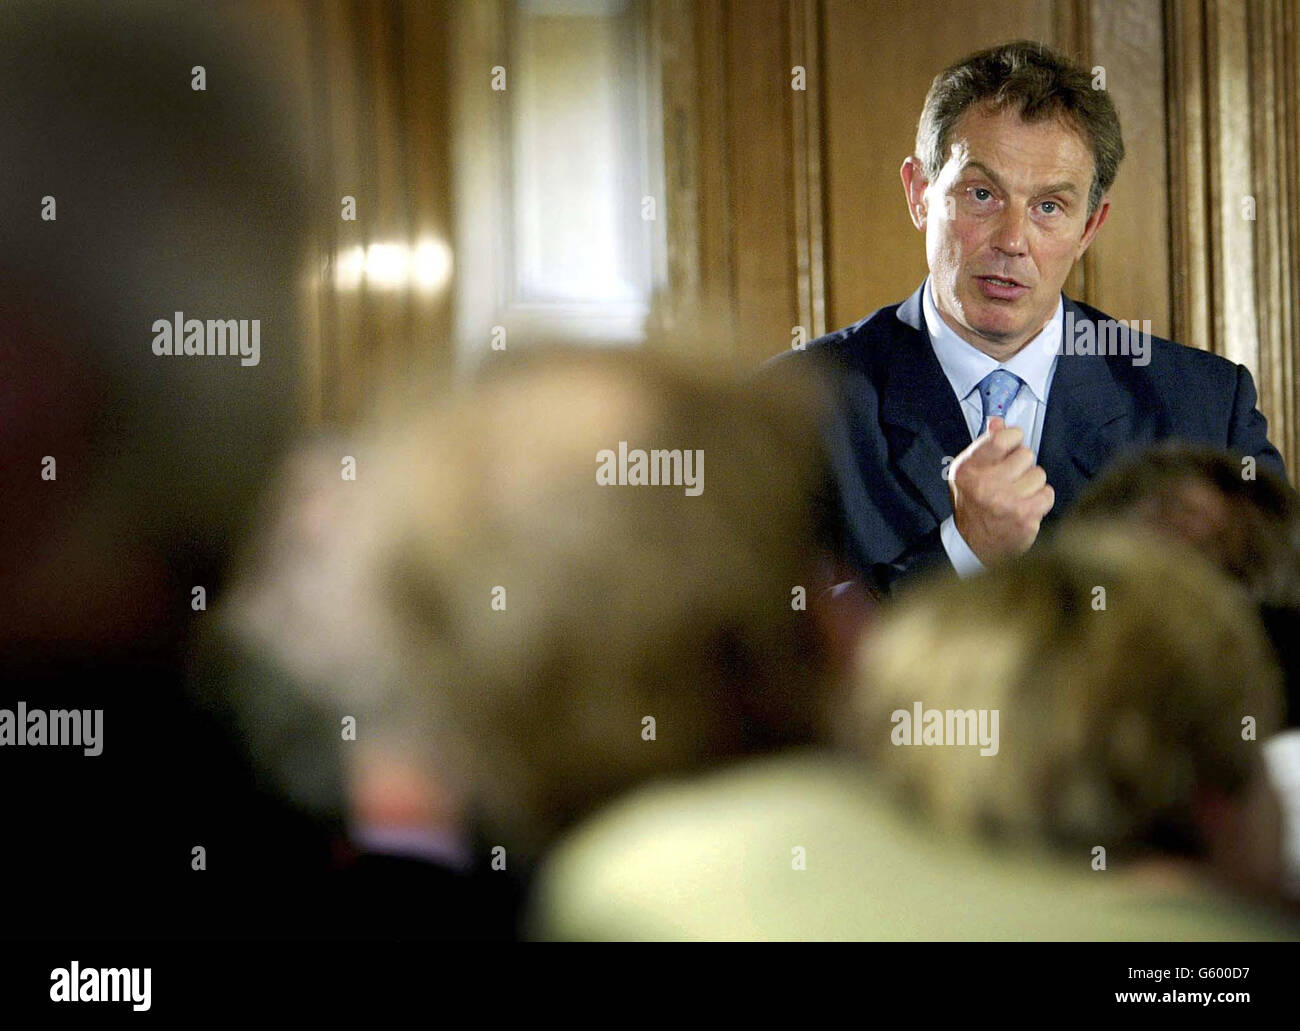 Prime Minister Tony Blair talks to journalists during a new style press briefing inside Downing Street. Blair said on Thursday an attack on Iraq was not imminent but held out little hope for negotiations about weapons inspectors returning. Stock Photo